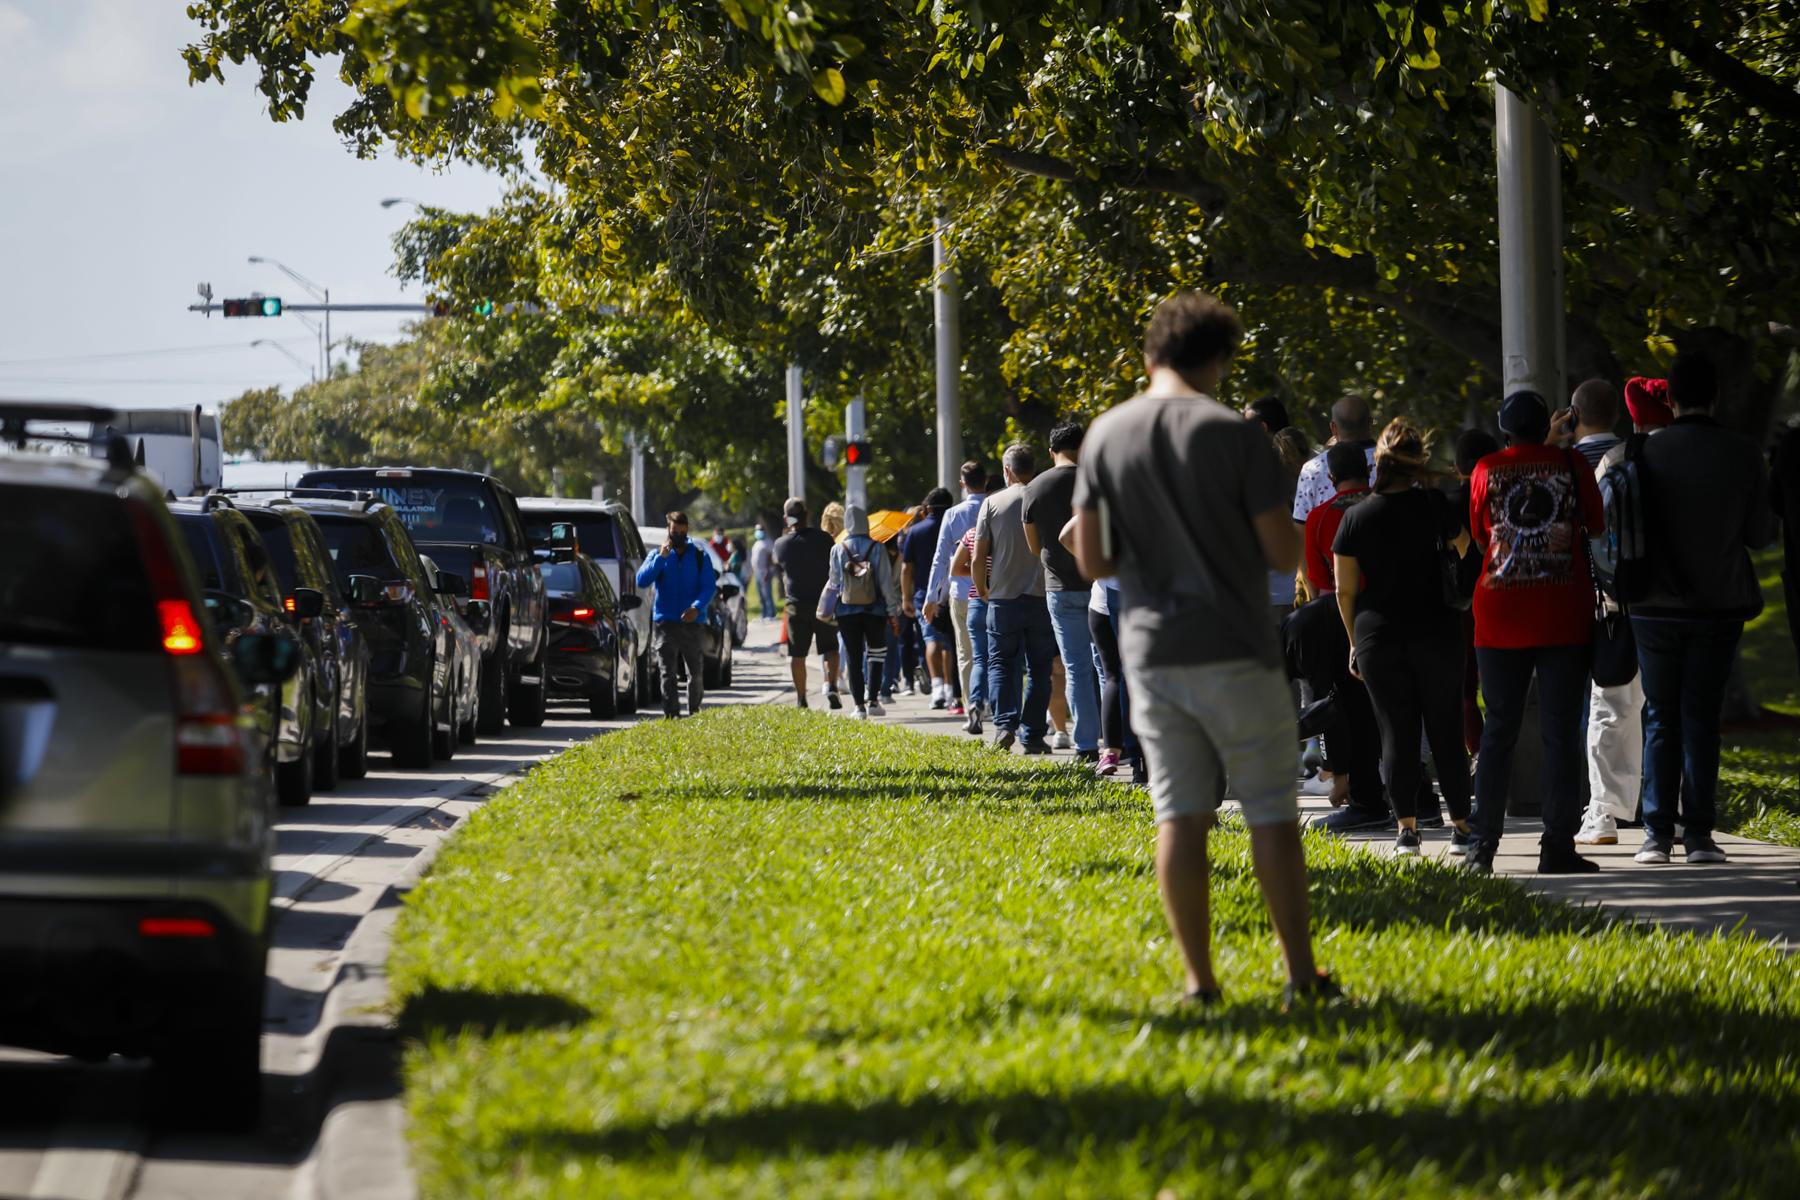 People wait in line to get the COVID-19 vaccine in a COVID-19 Community Vaccination Center, a state-run federally supported by Federal Emergency Management Agency (FEMA) at the Miami Dade College North Campus in North Miami, Florida, U.S., on Wednesday, Mar. 10, 2021. Photographer: Eva Marie Uzcategui/Bloomberg